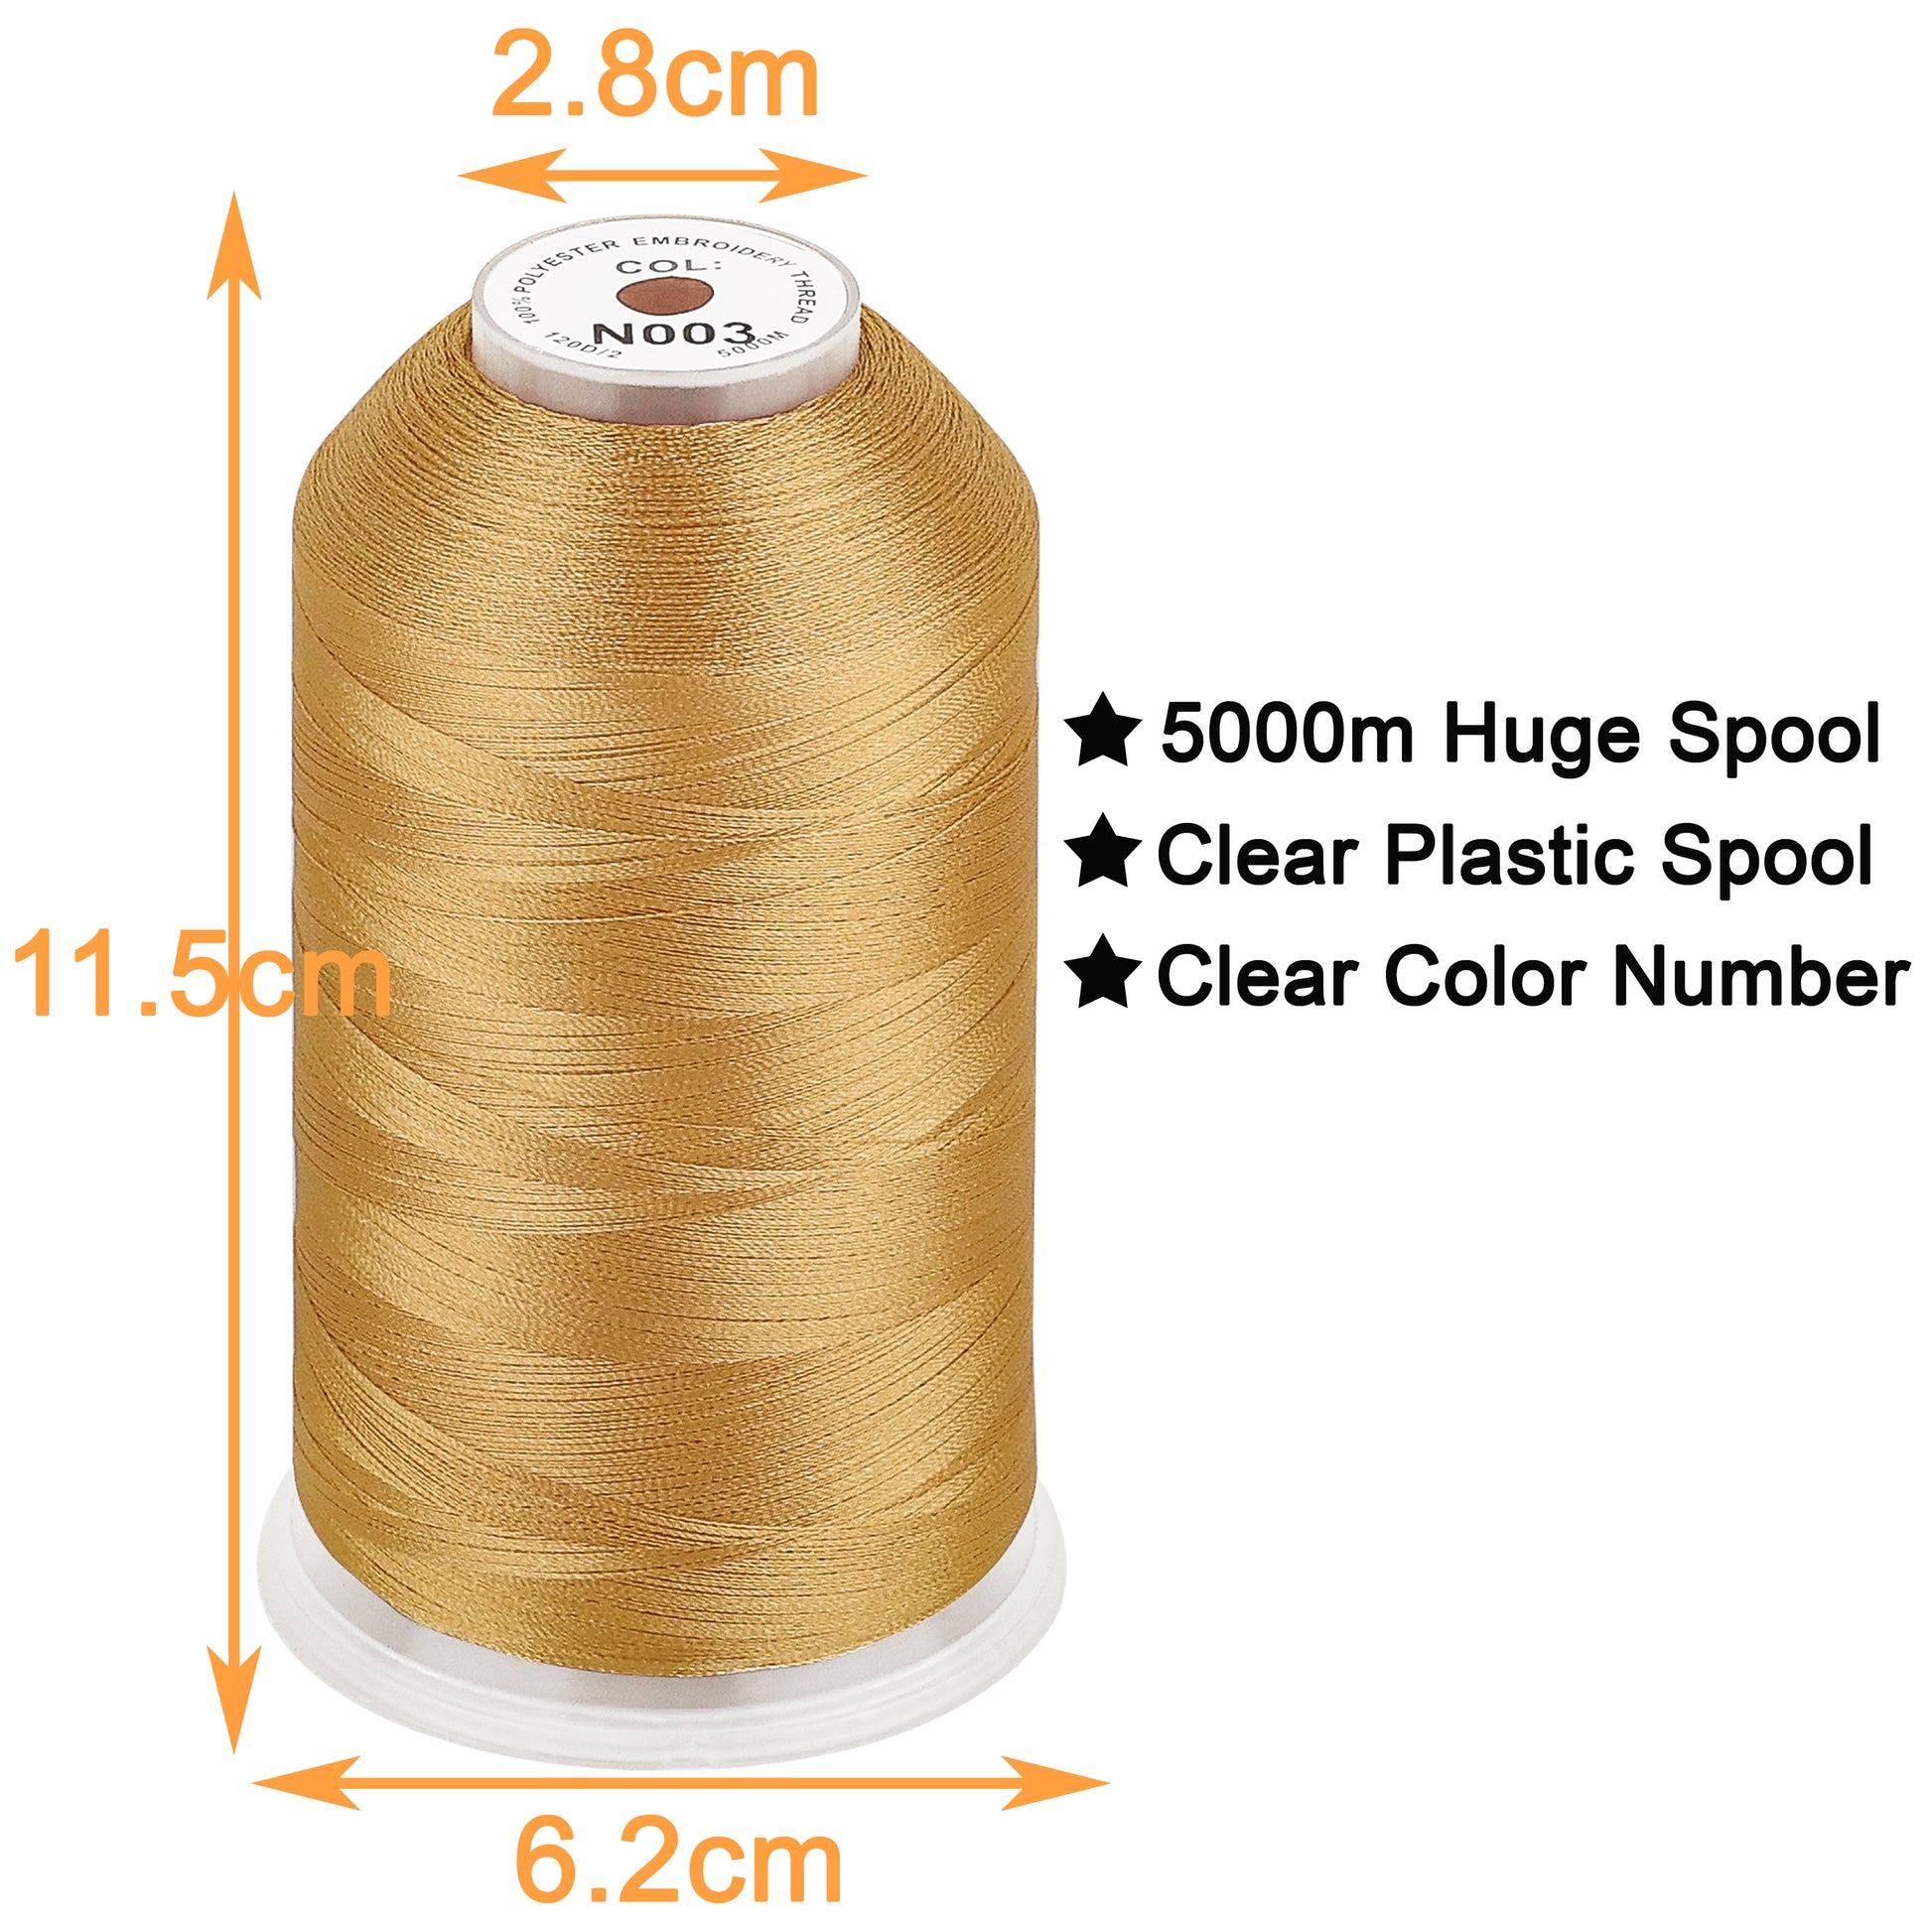 New brothread 5000M Huge Spool Polyester Embroidery Machine Thread Basic  Color 1 